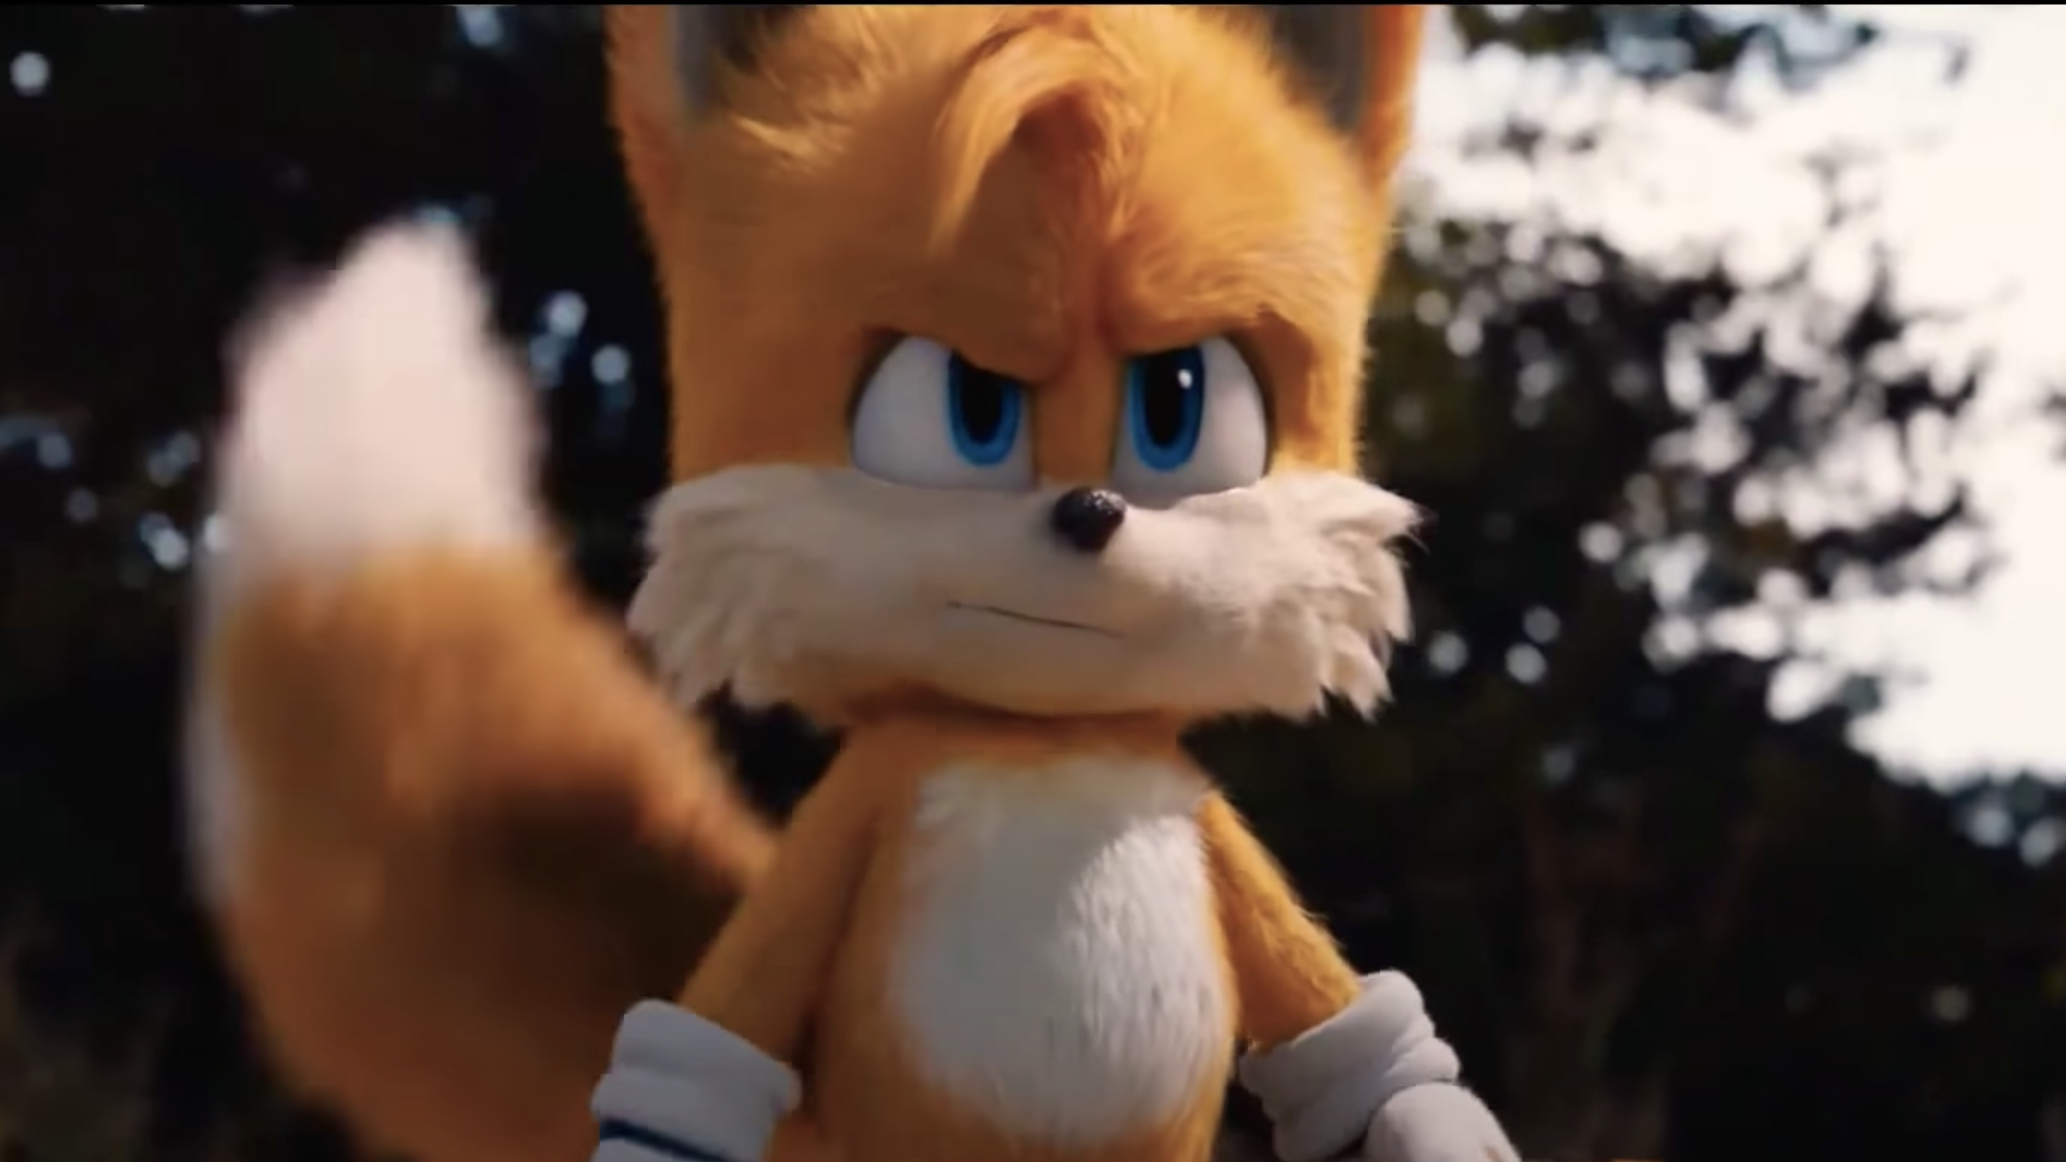 Sonic Movie 2 Poster Adds Tika Sumpter And Tails Voice Colleen  O'Shaughnessey